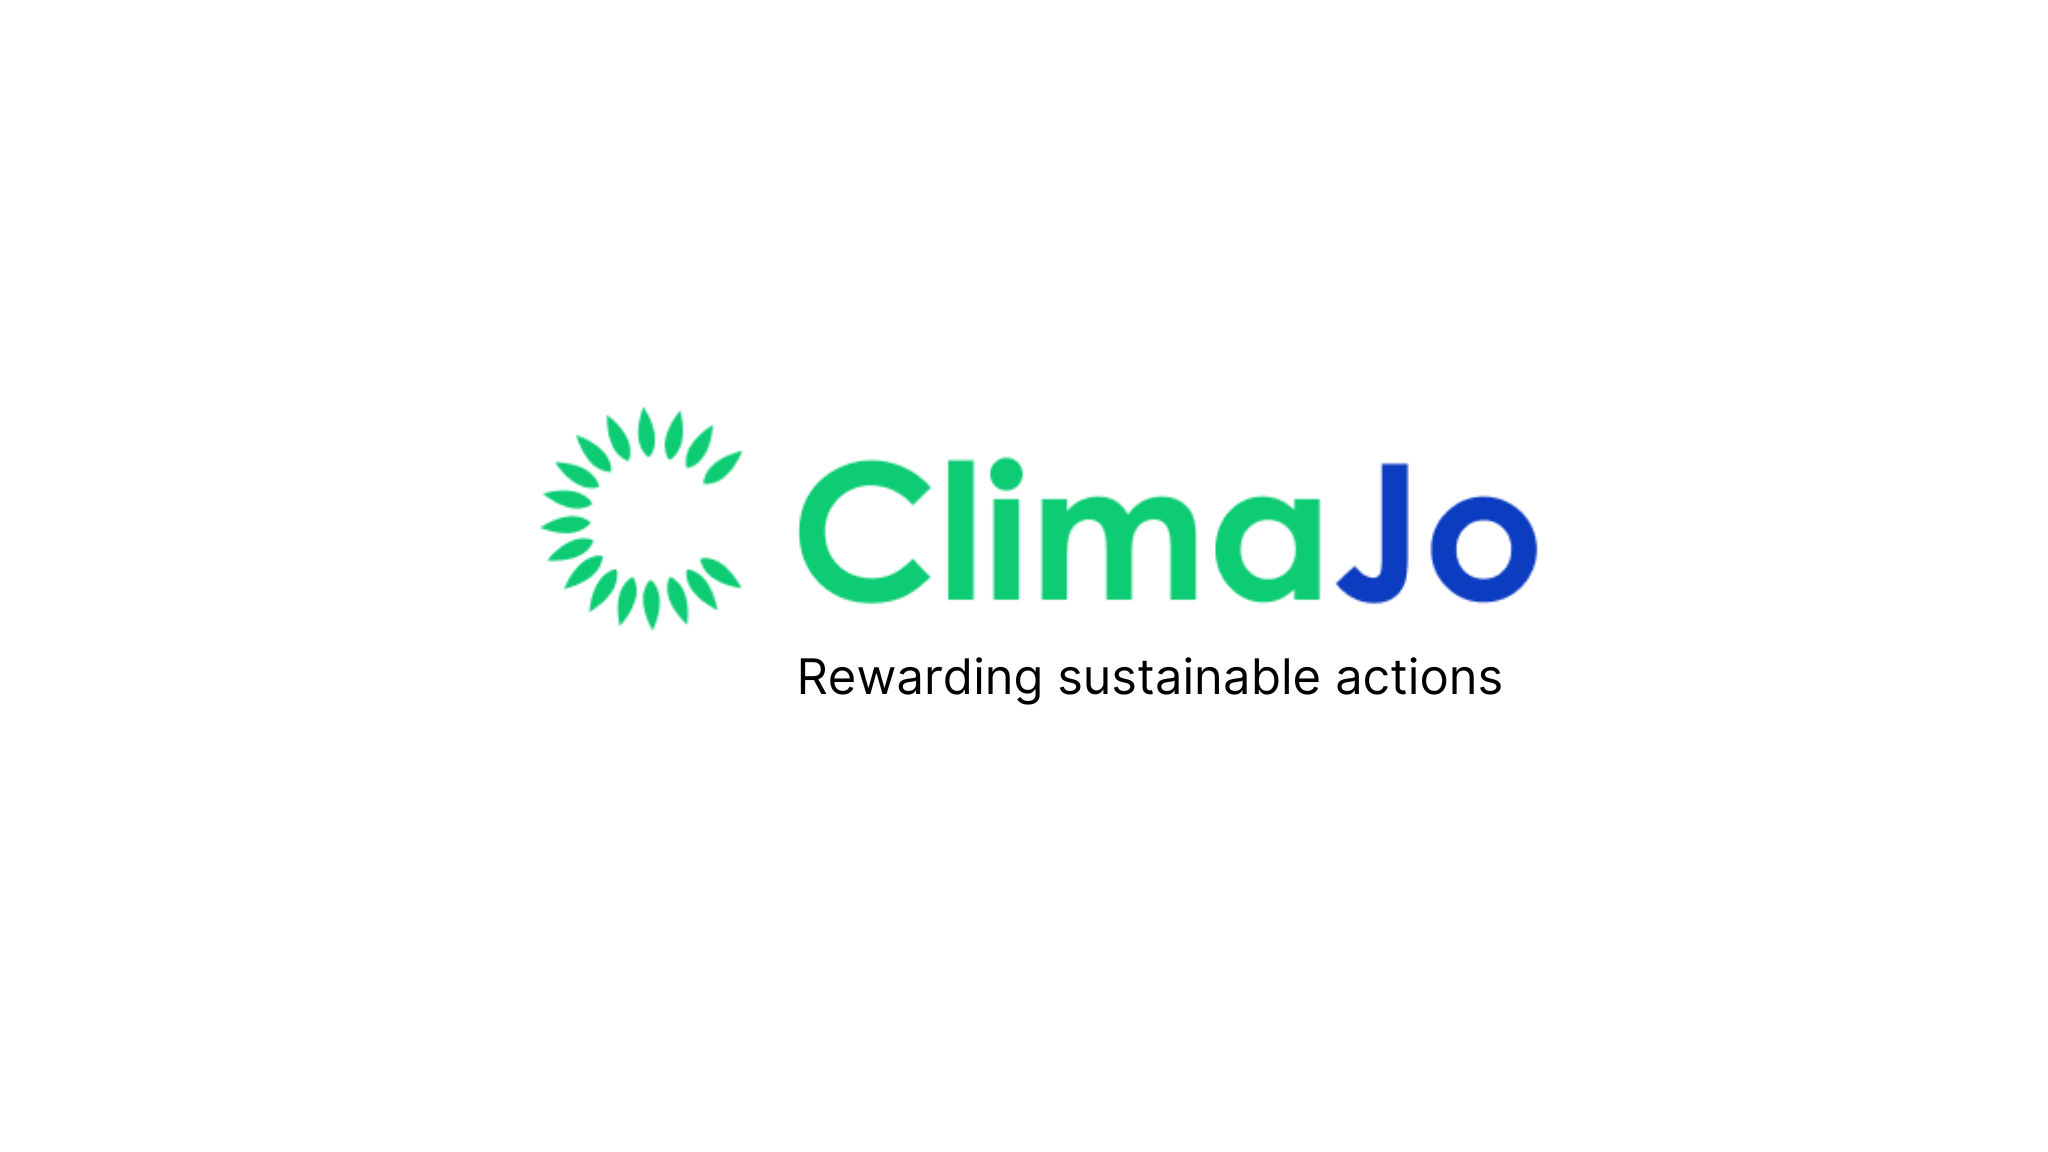 ClimaJo – rewarding sustainable actions